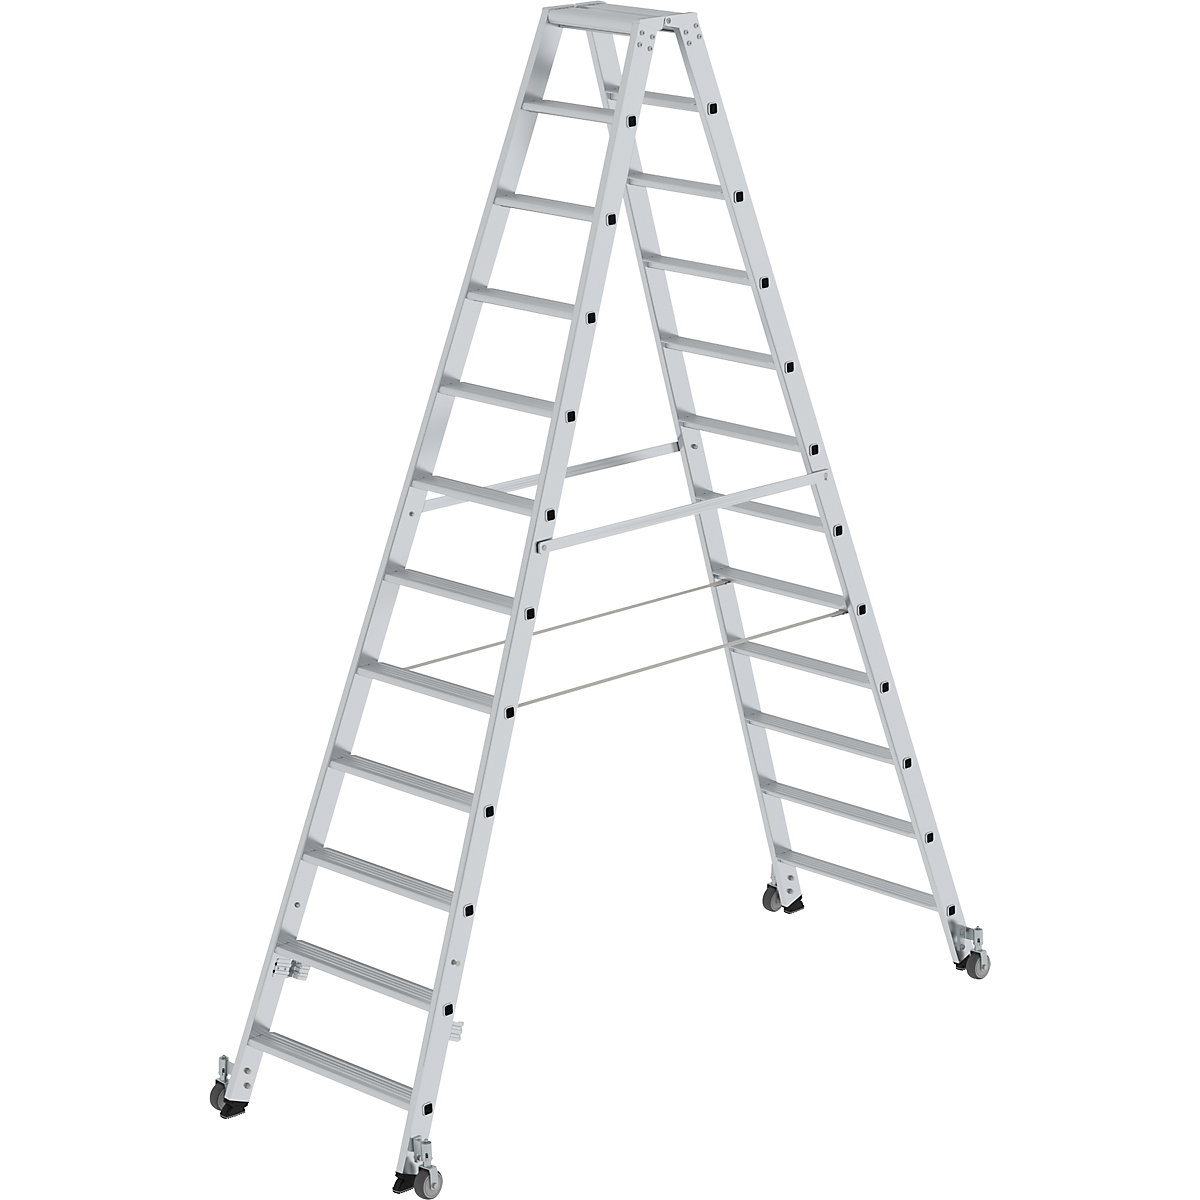 Step ladder, double sided – MUNK, mobile model, 2 x 12 steps-7